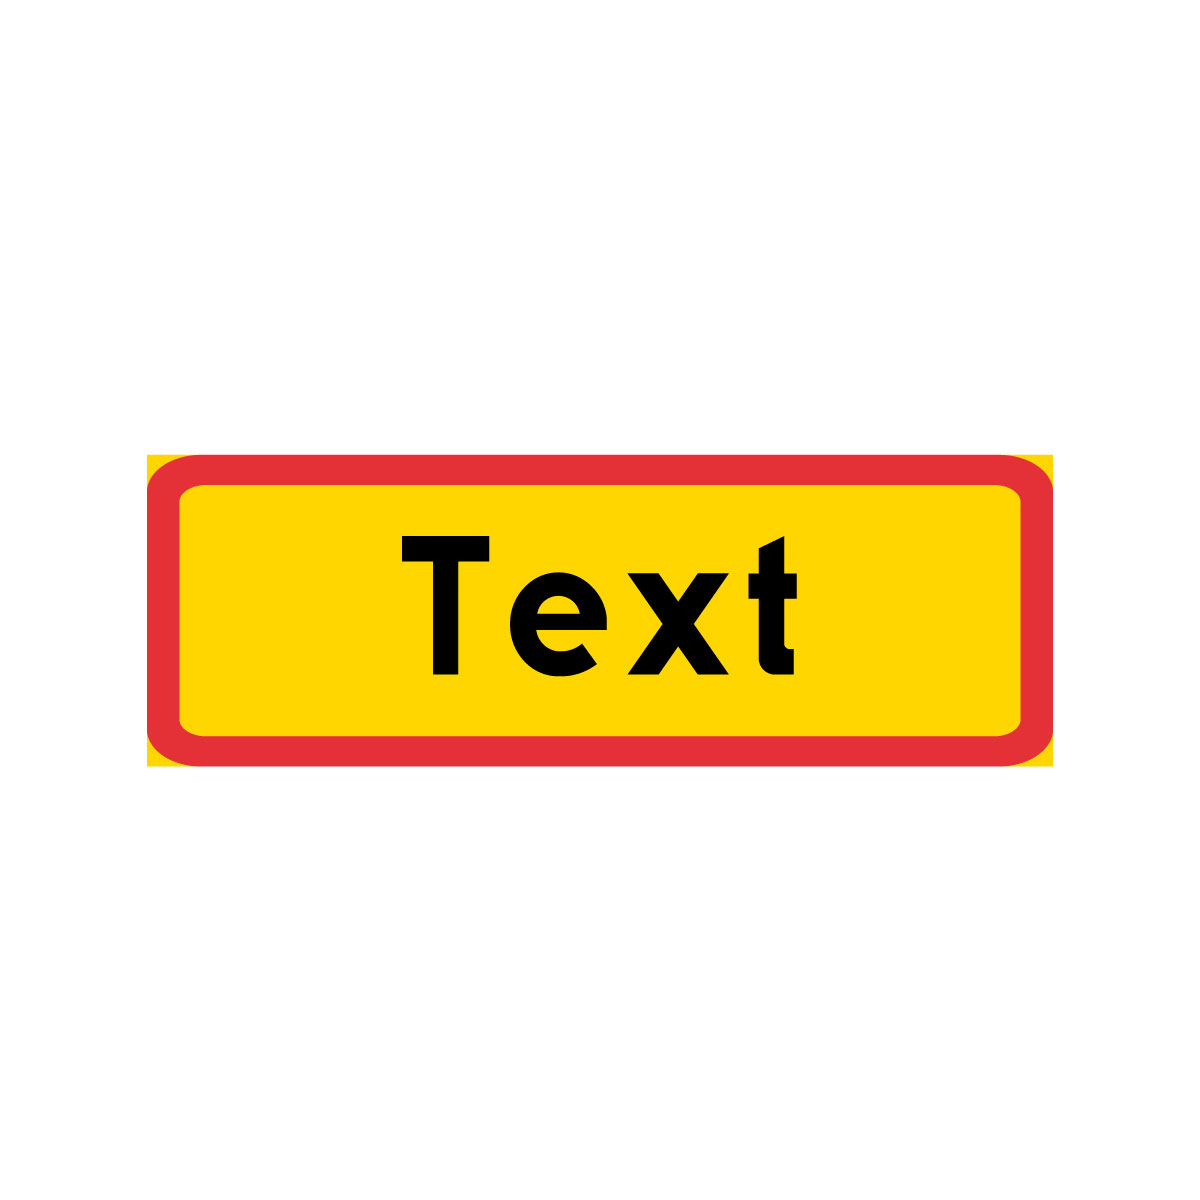 T22 N Text 640 x 220 mm